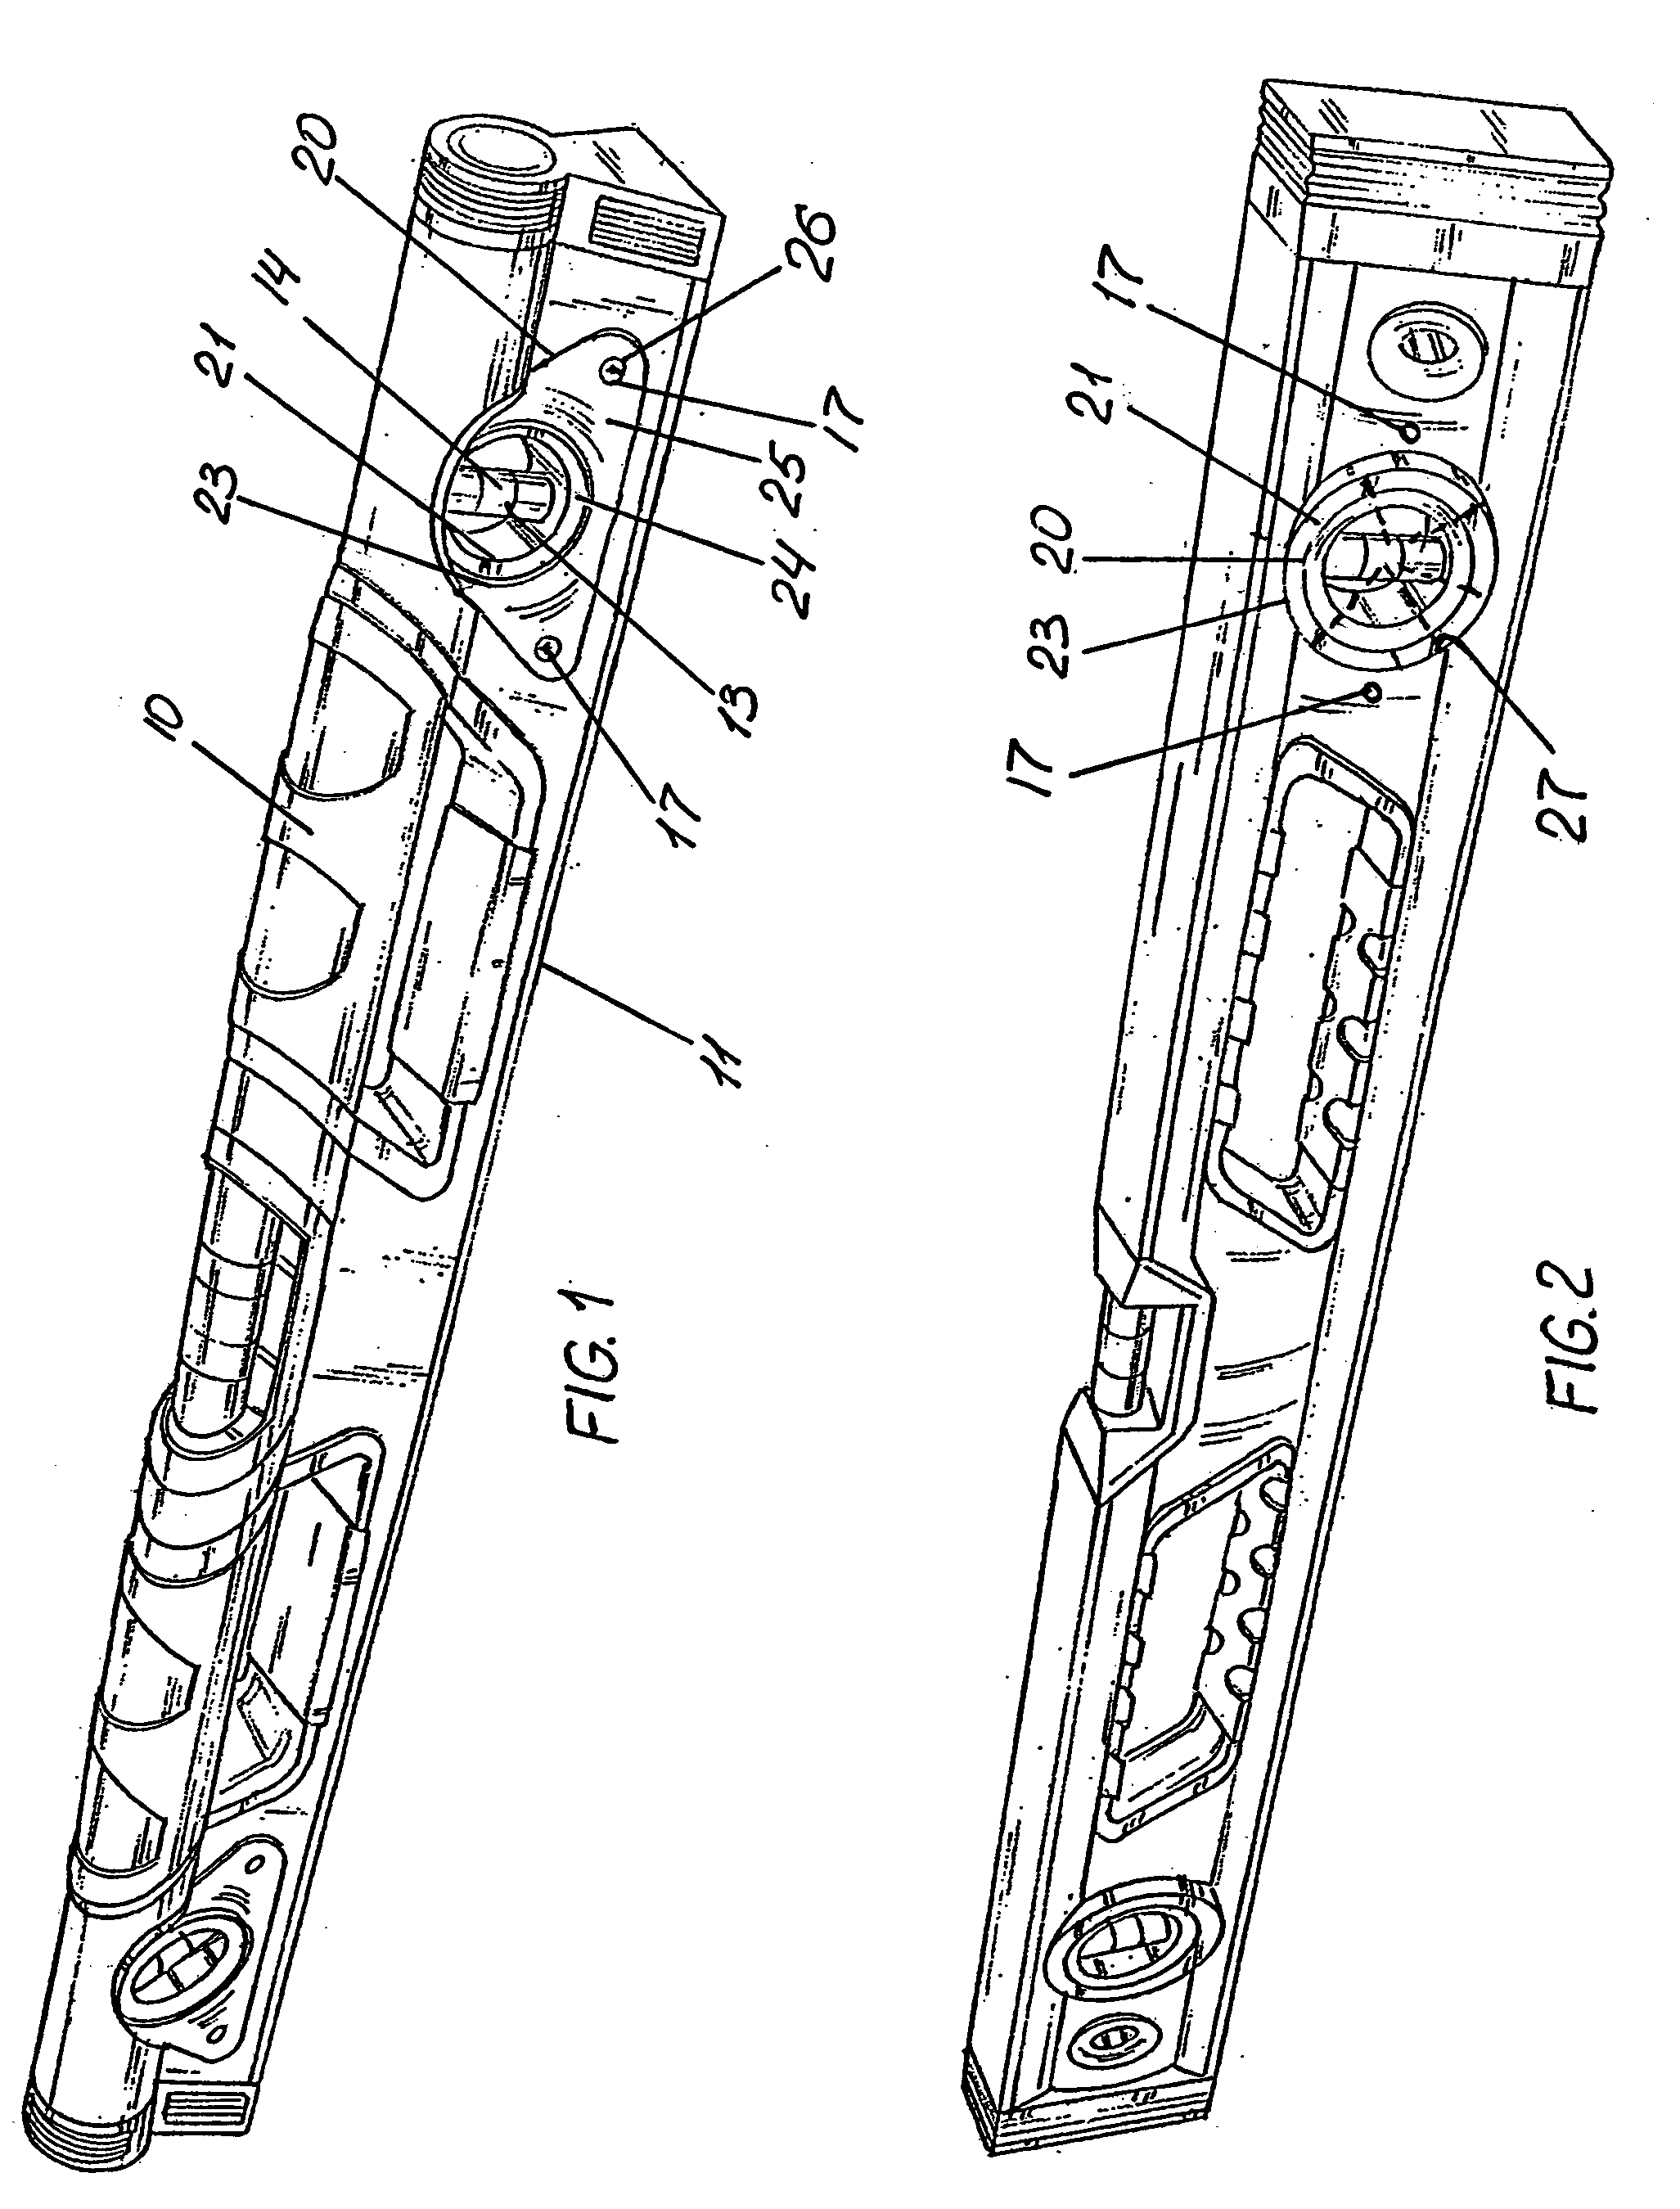 Structure and method for holding and protecting vials in levels